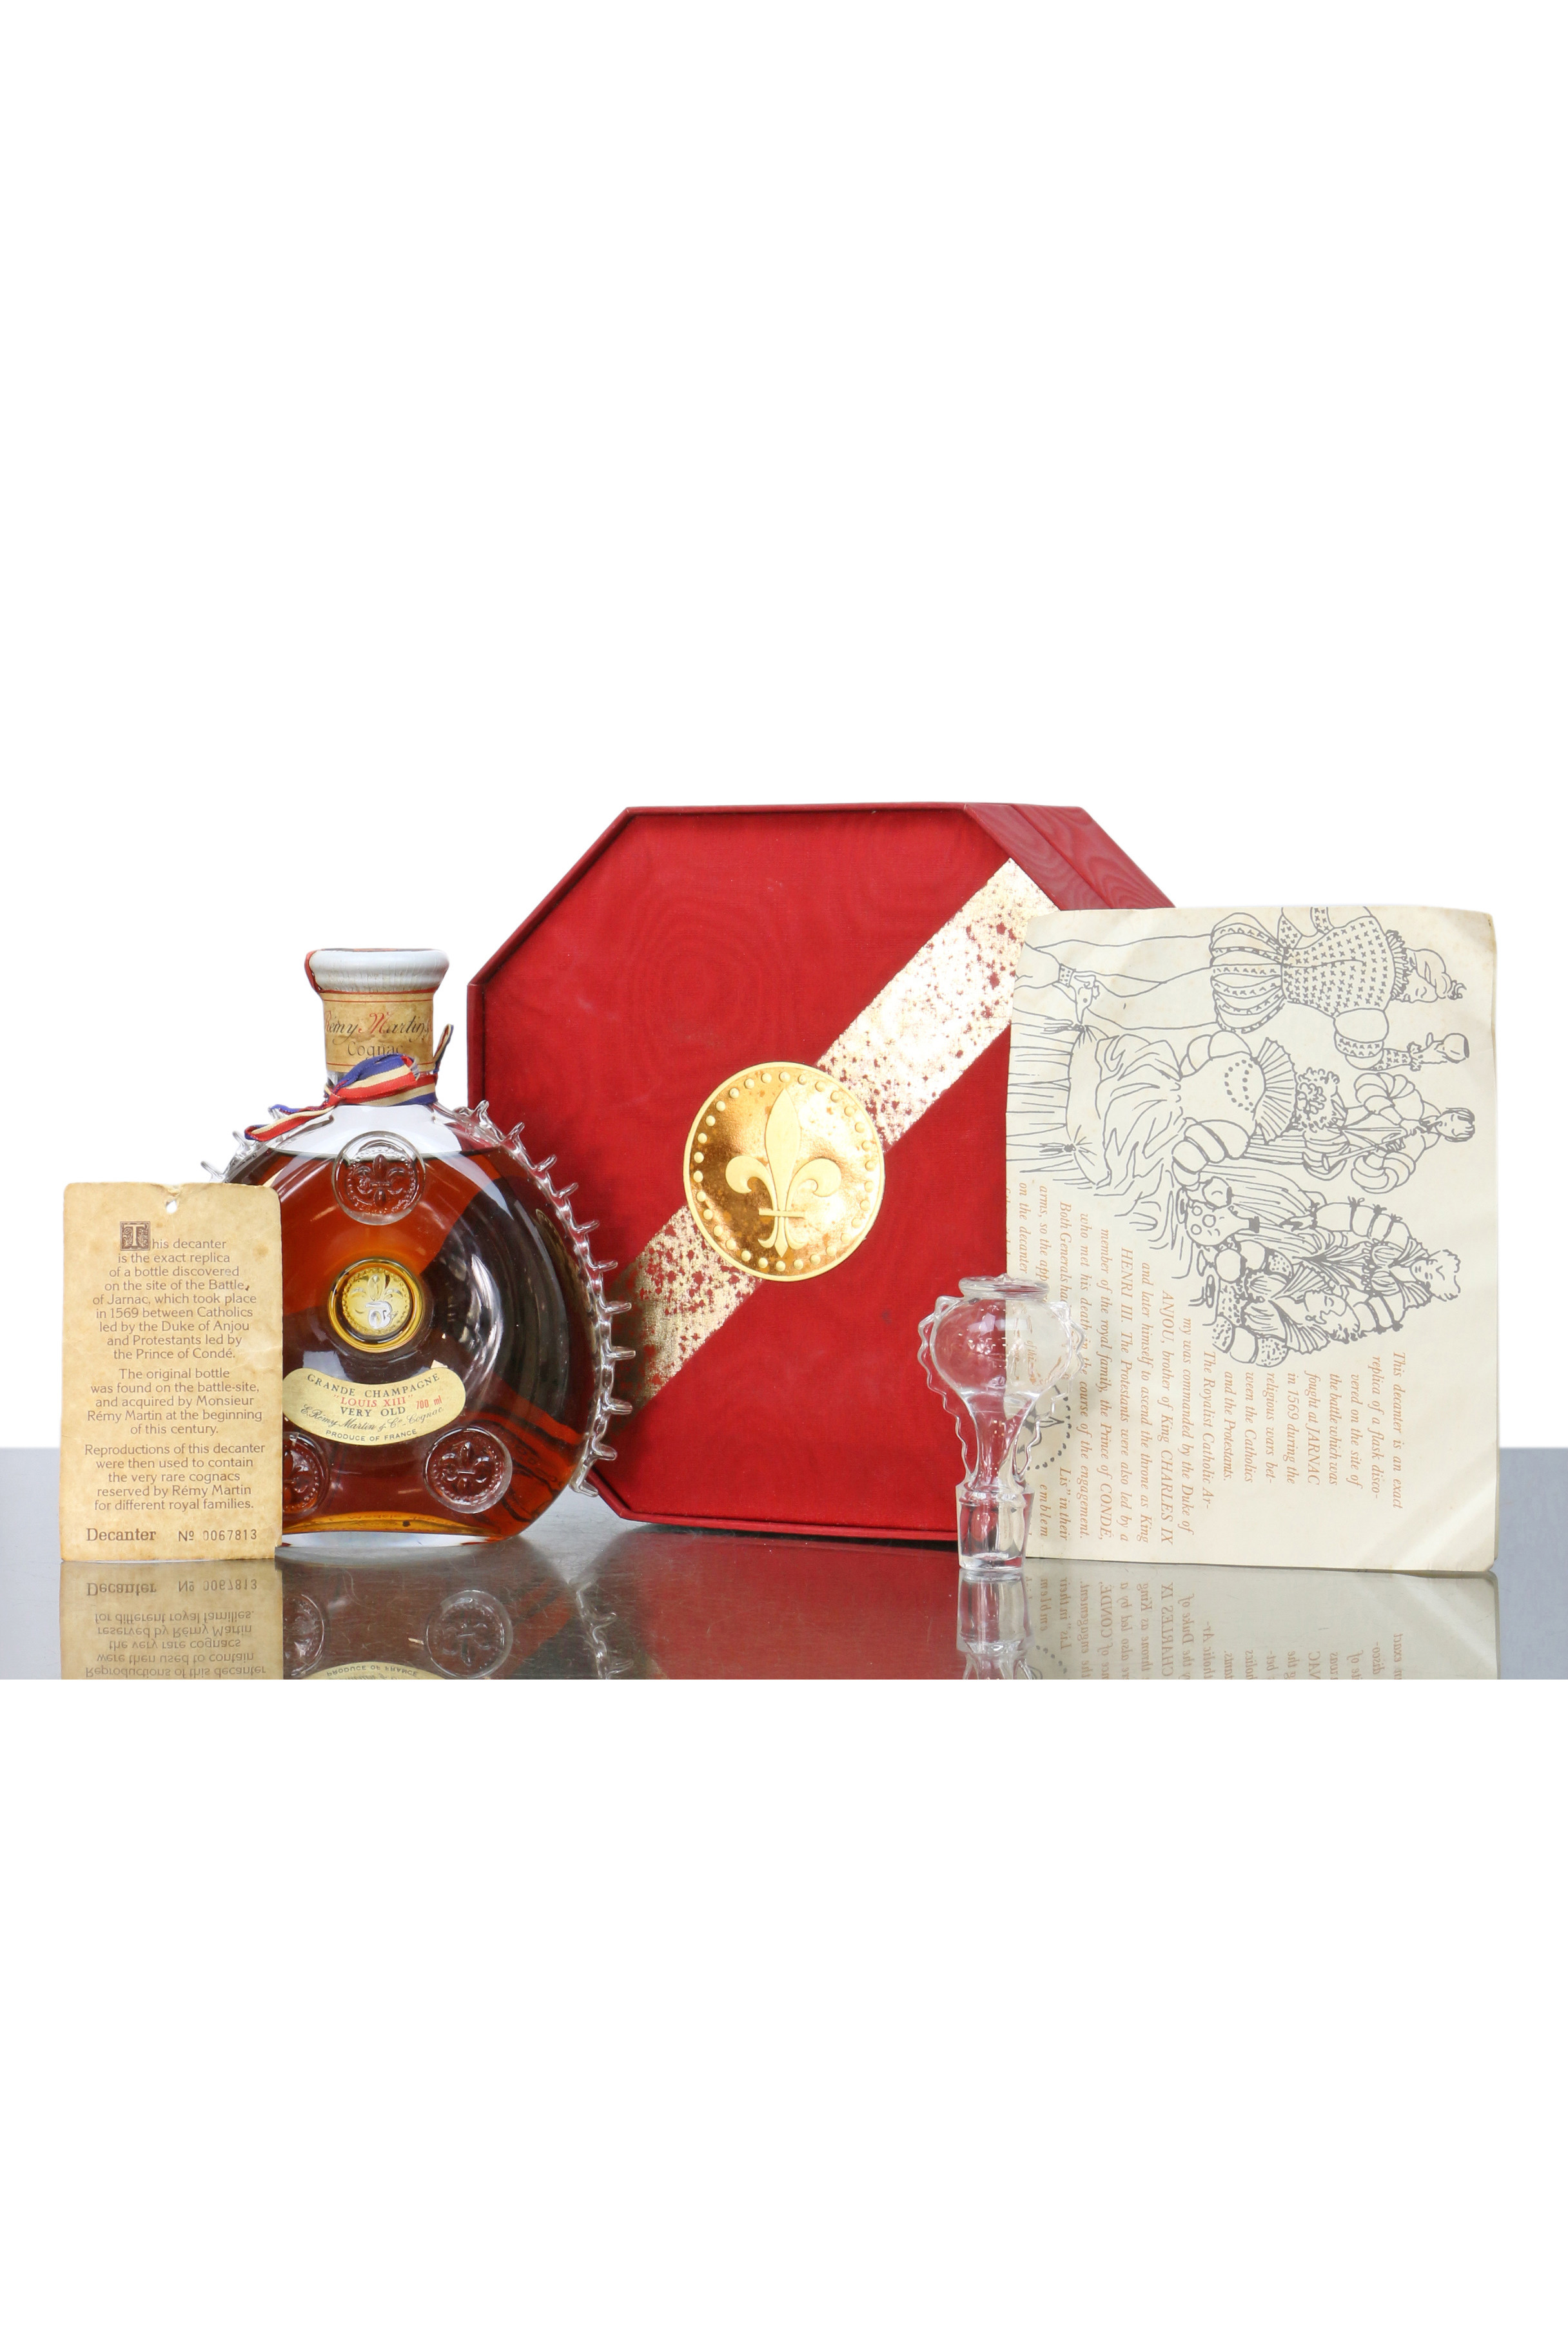 Sold at Auction: Remy Martin Louis XIII Very Old Grande Champagne